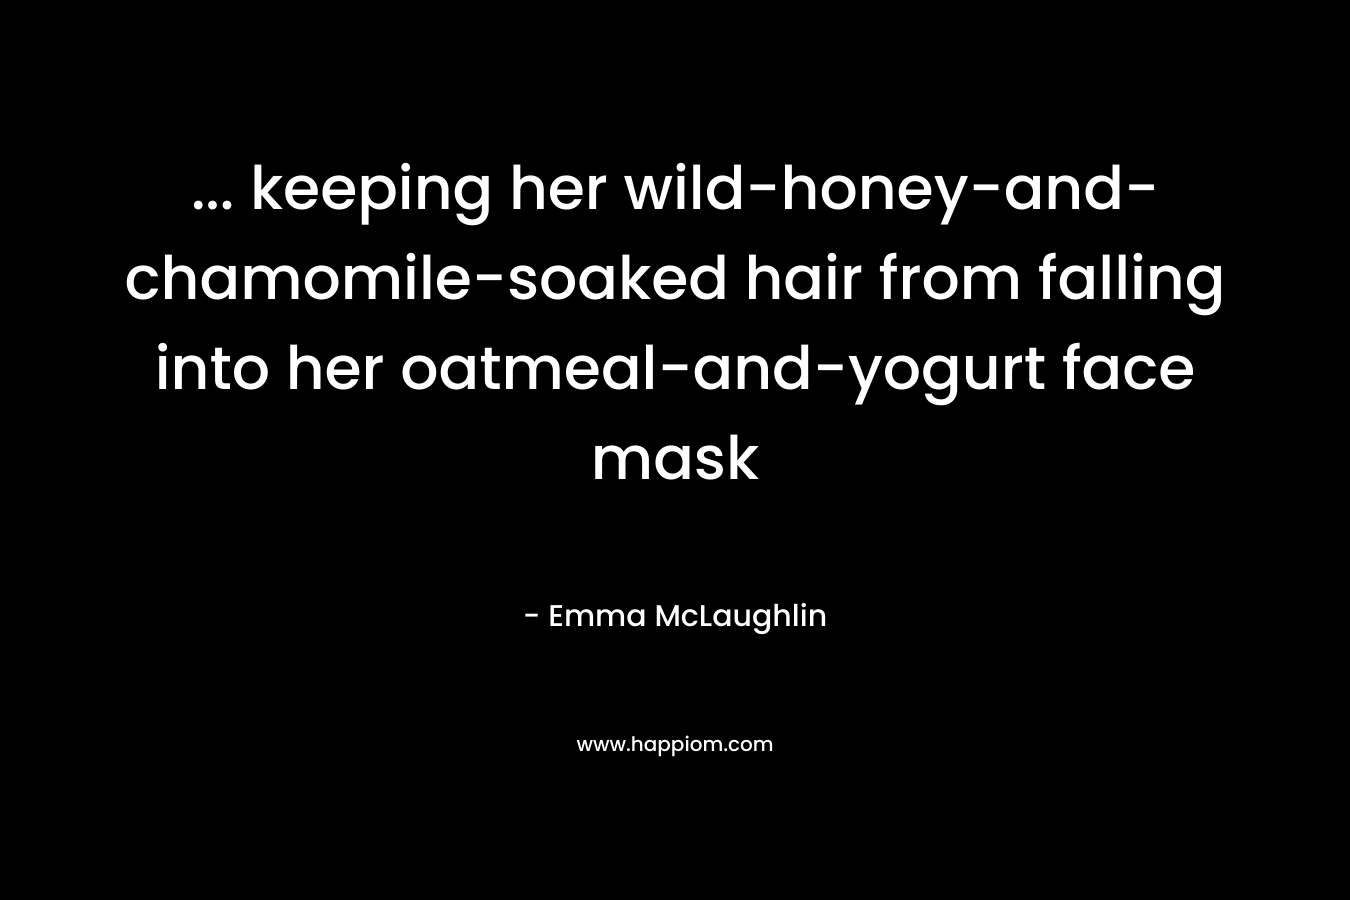 ... keeping her wild-honey-and-chamomile-soaked hair from falling into her oatmeal-and-yogurt face mask